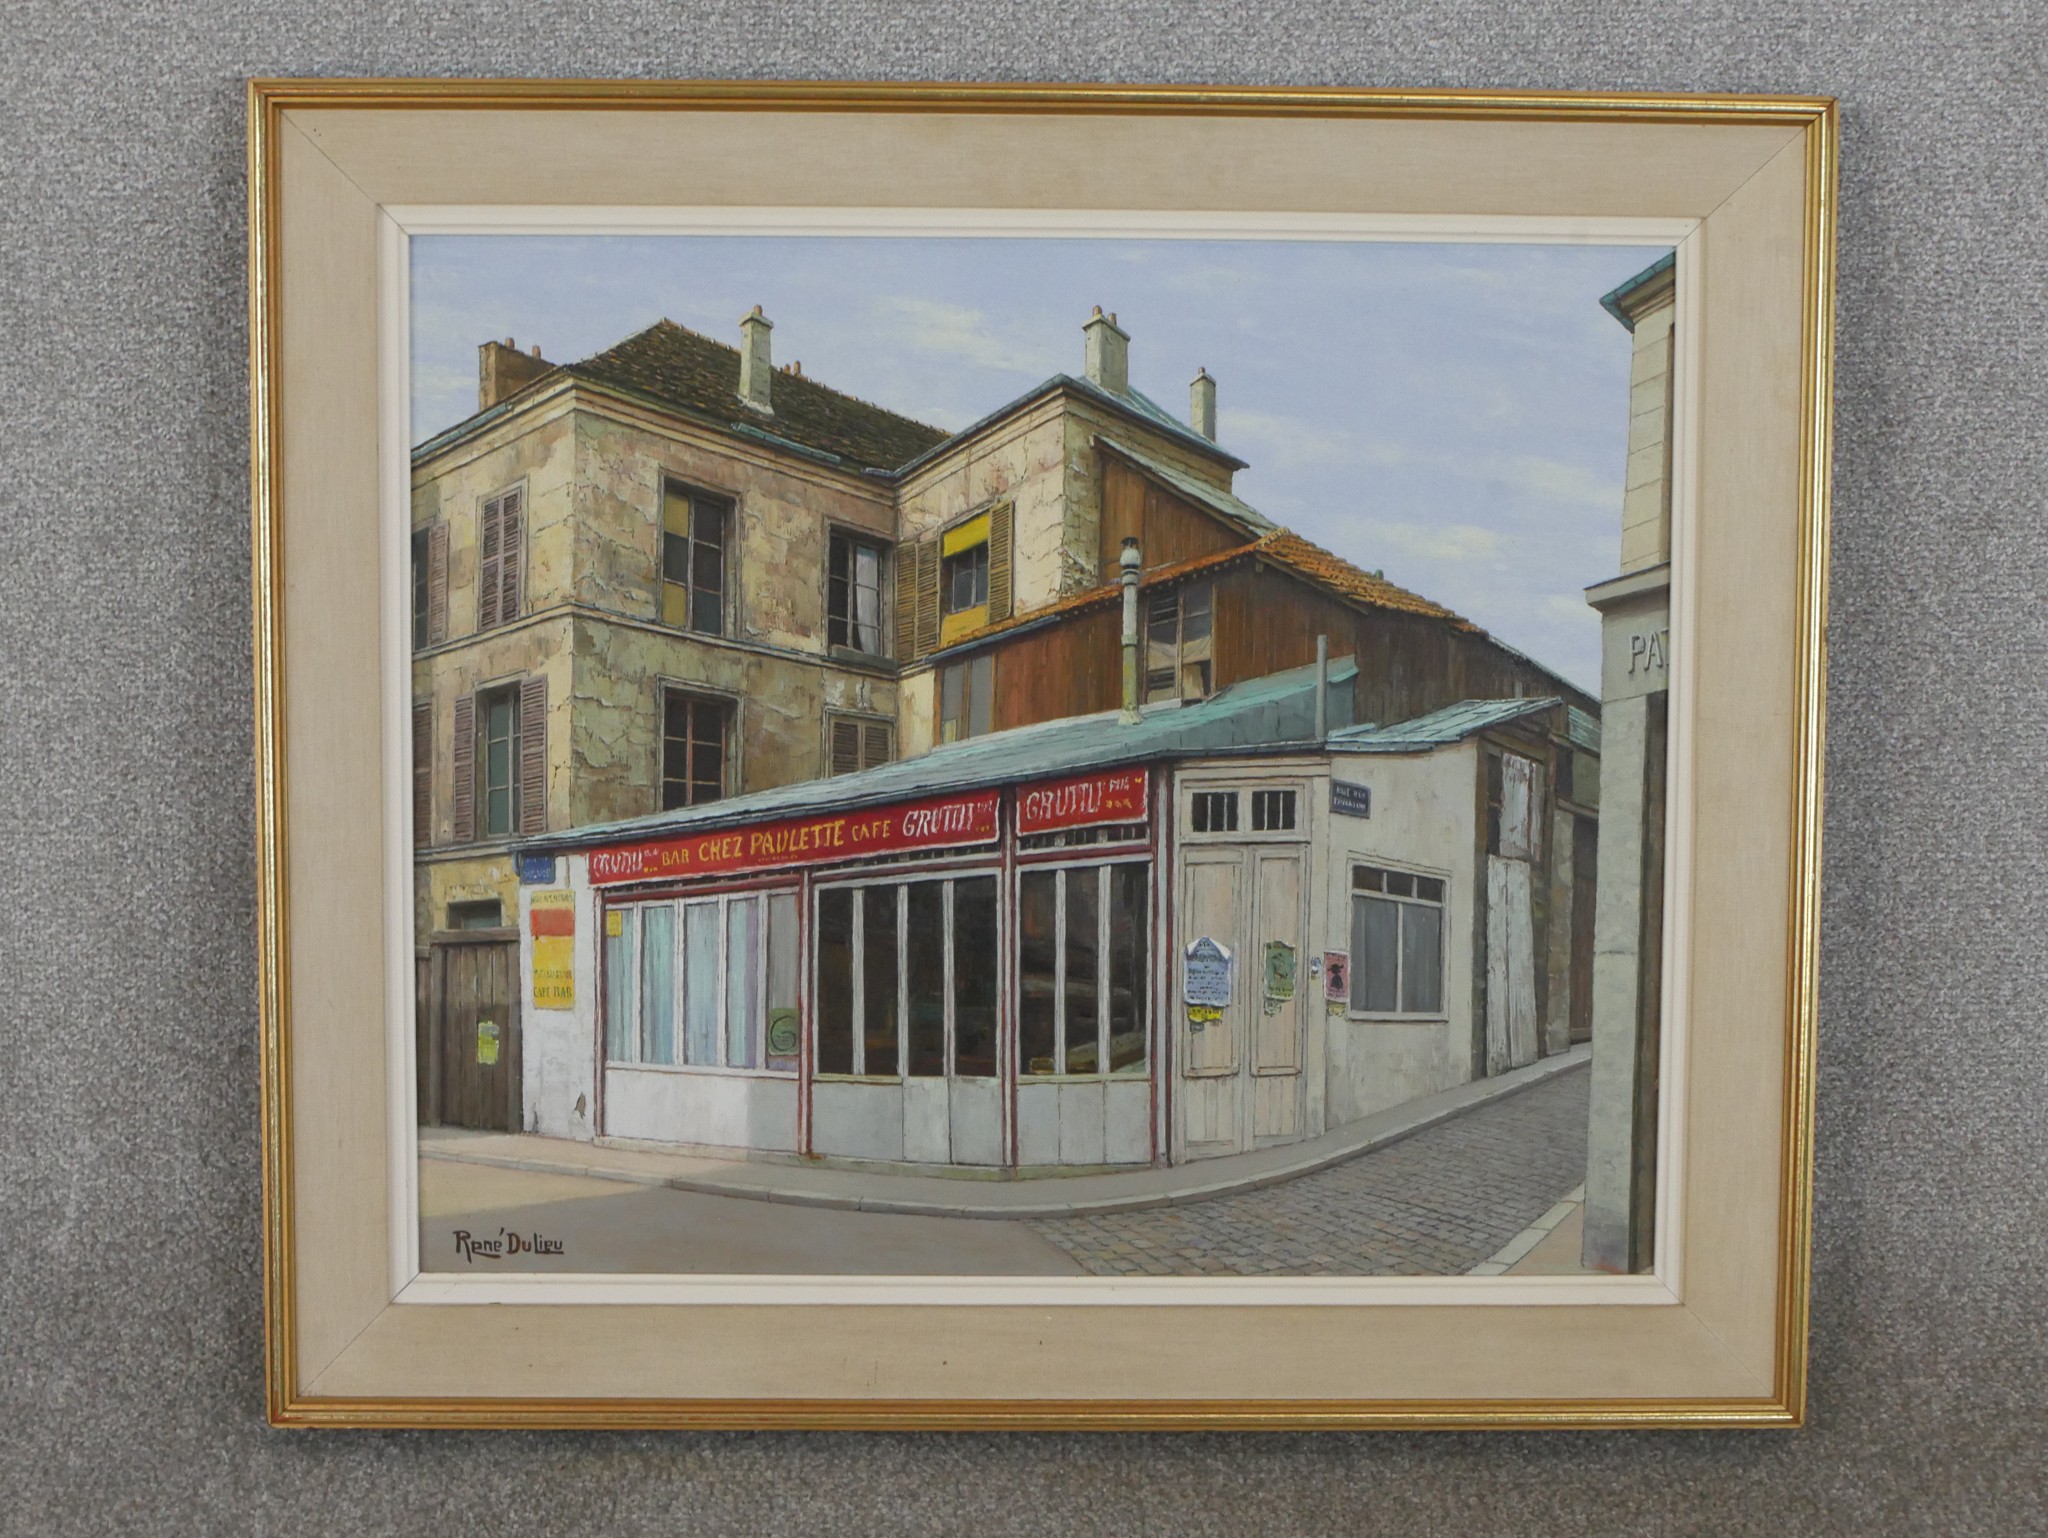 Rene Dulieu (20th Century French), Bar Chez Paulette 1974, oil on canvas, signed lower left, bearing - Image 2 of 8